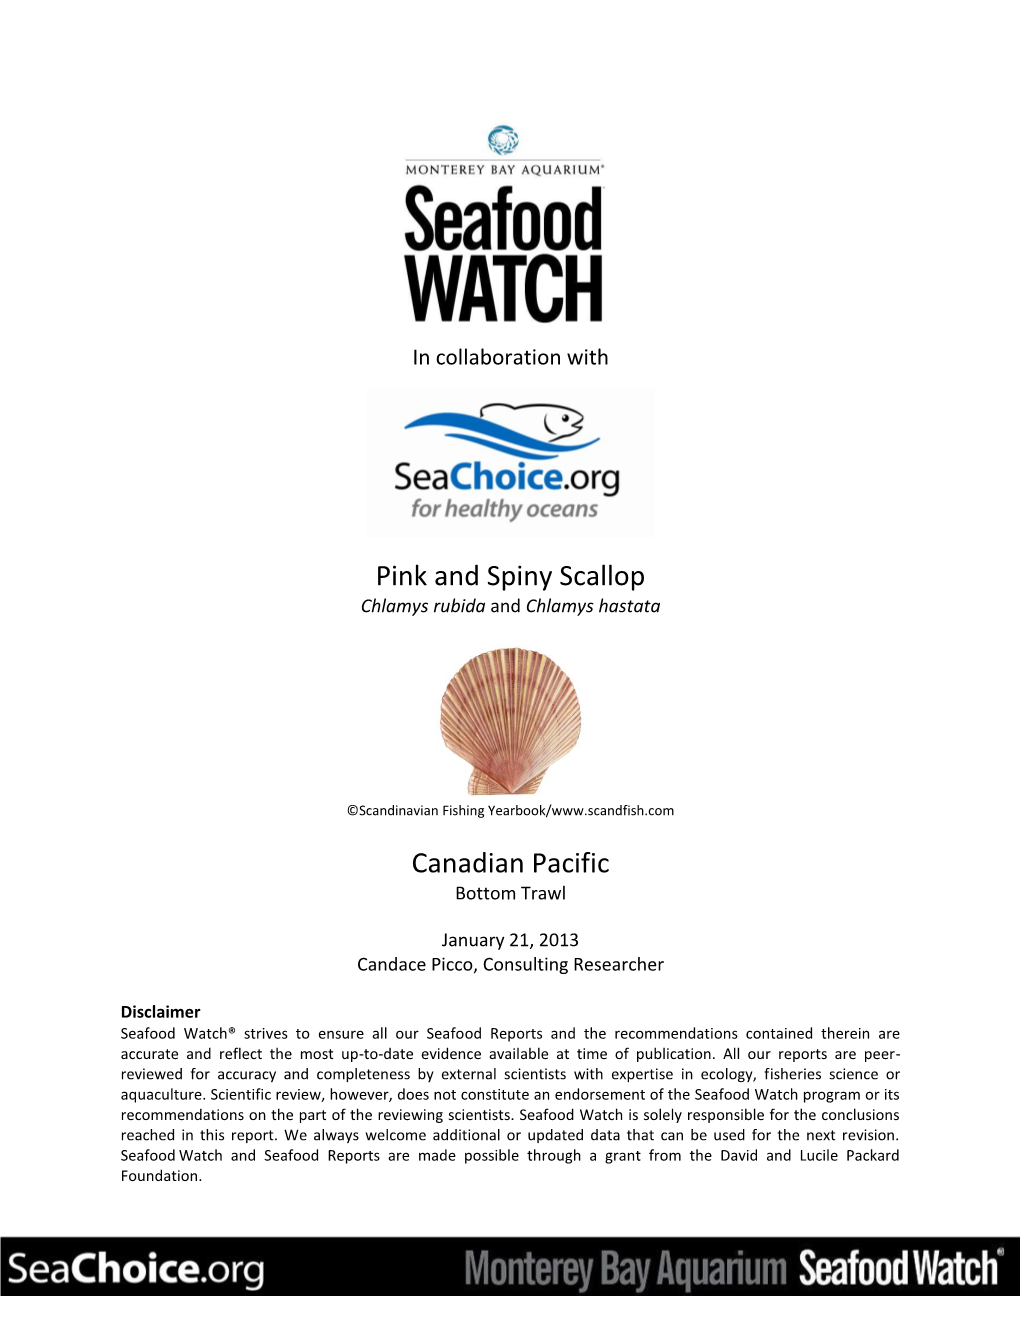 Reports, Seafood Watch® Seeks out Research Published in Academic, Peer-Reviewed Journals Whenever Possible